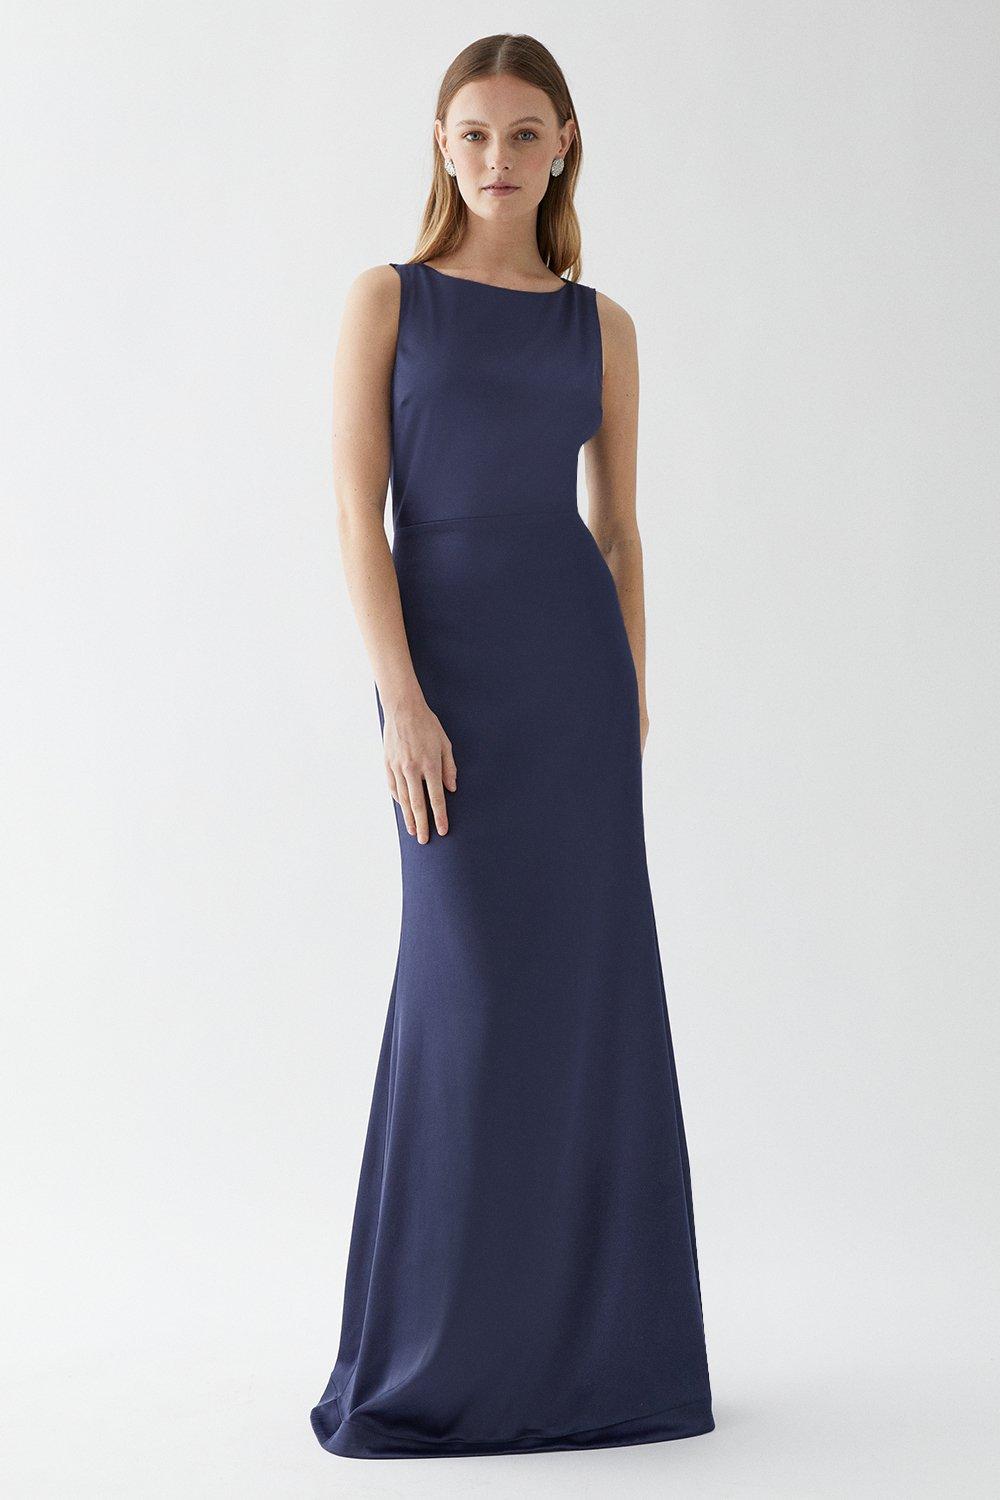 Structured Satin Stretch Lace Back Bridesmaid Dress - Navy